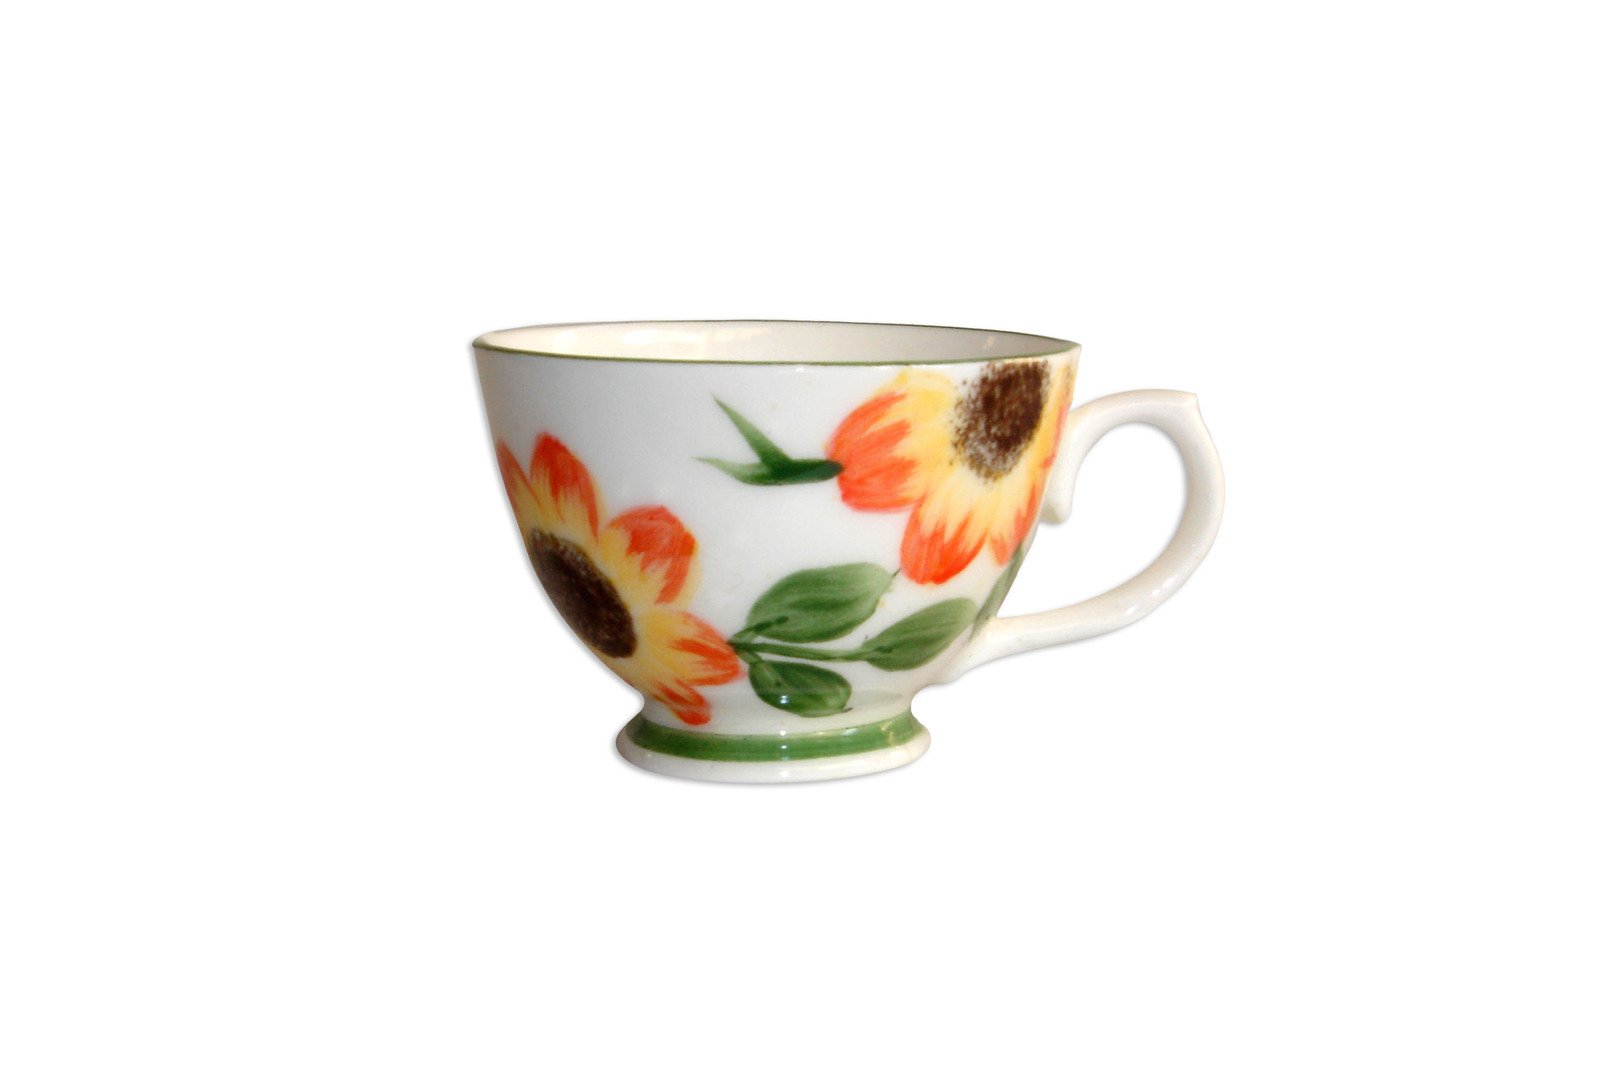 an image of a cup with a flower pattern on it